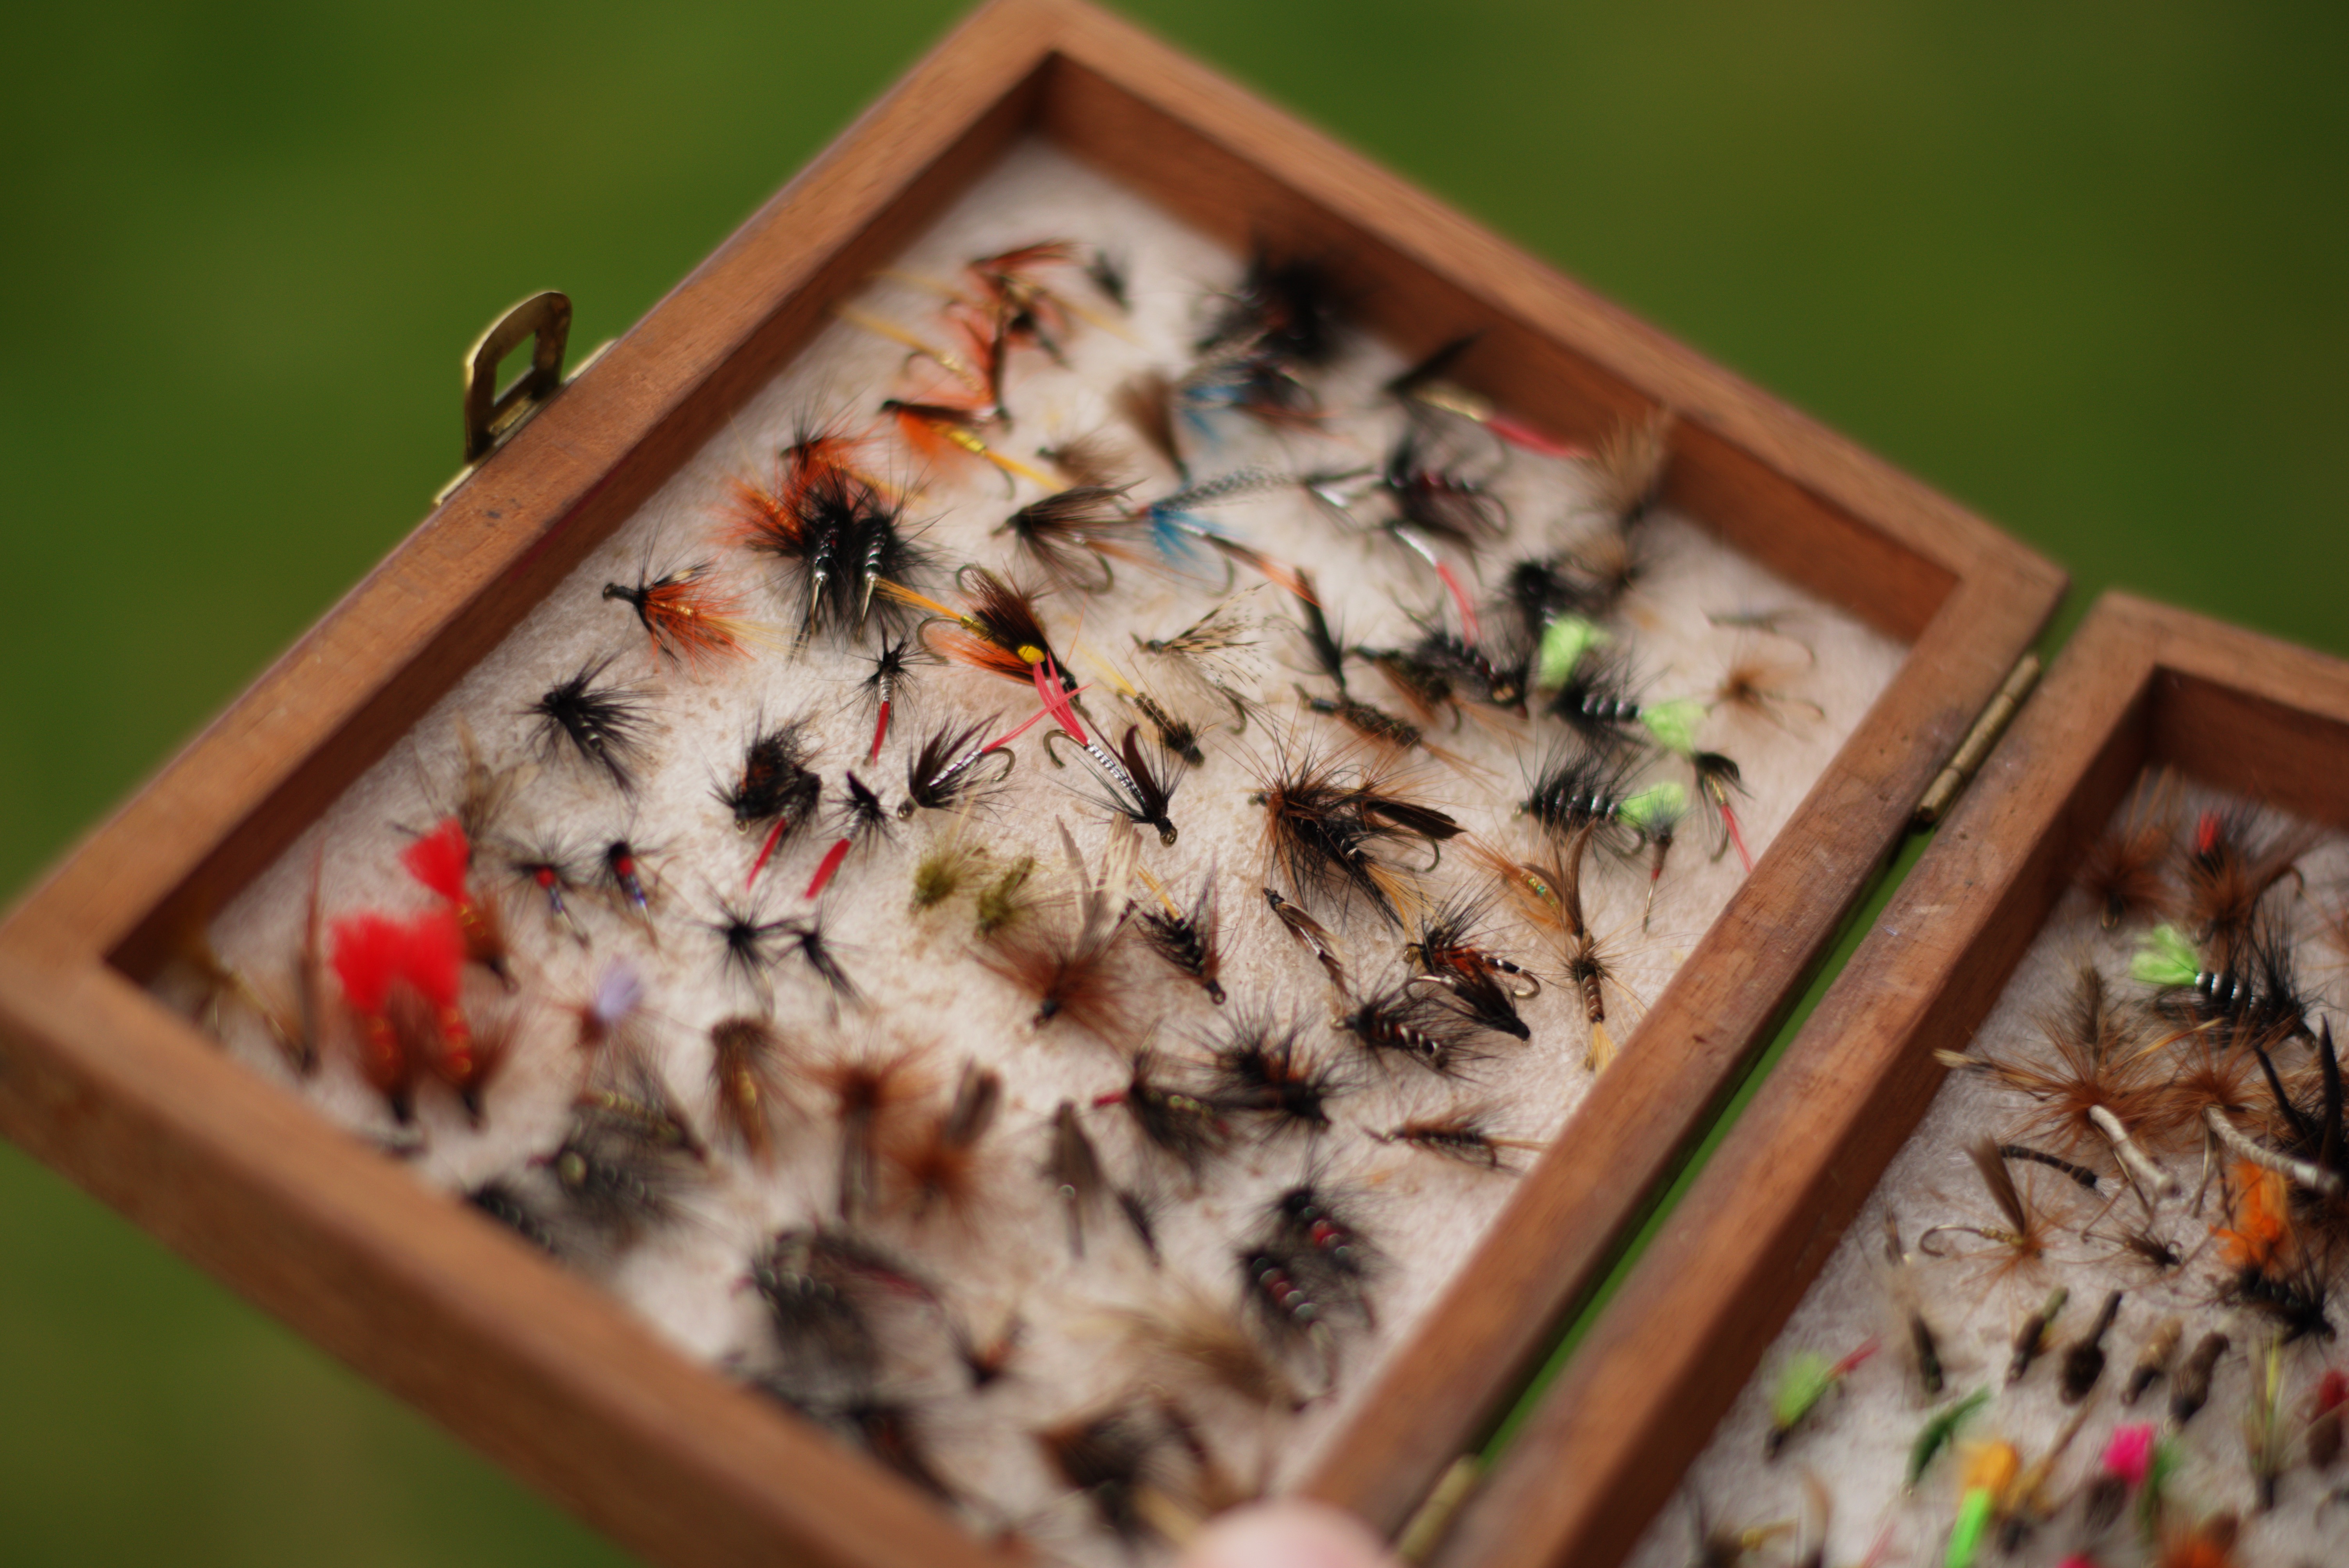 Every fly box has an anglers fingerprint on it - whose box is this?